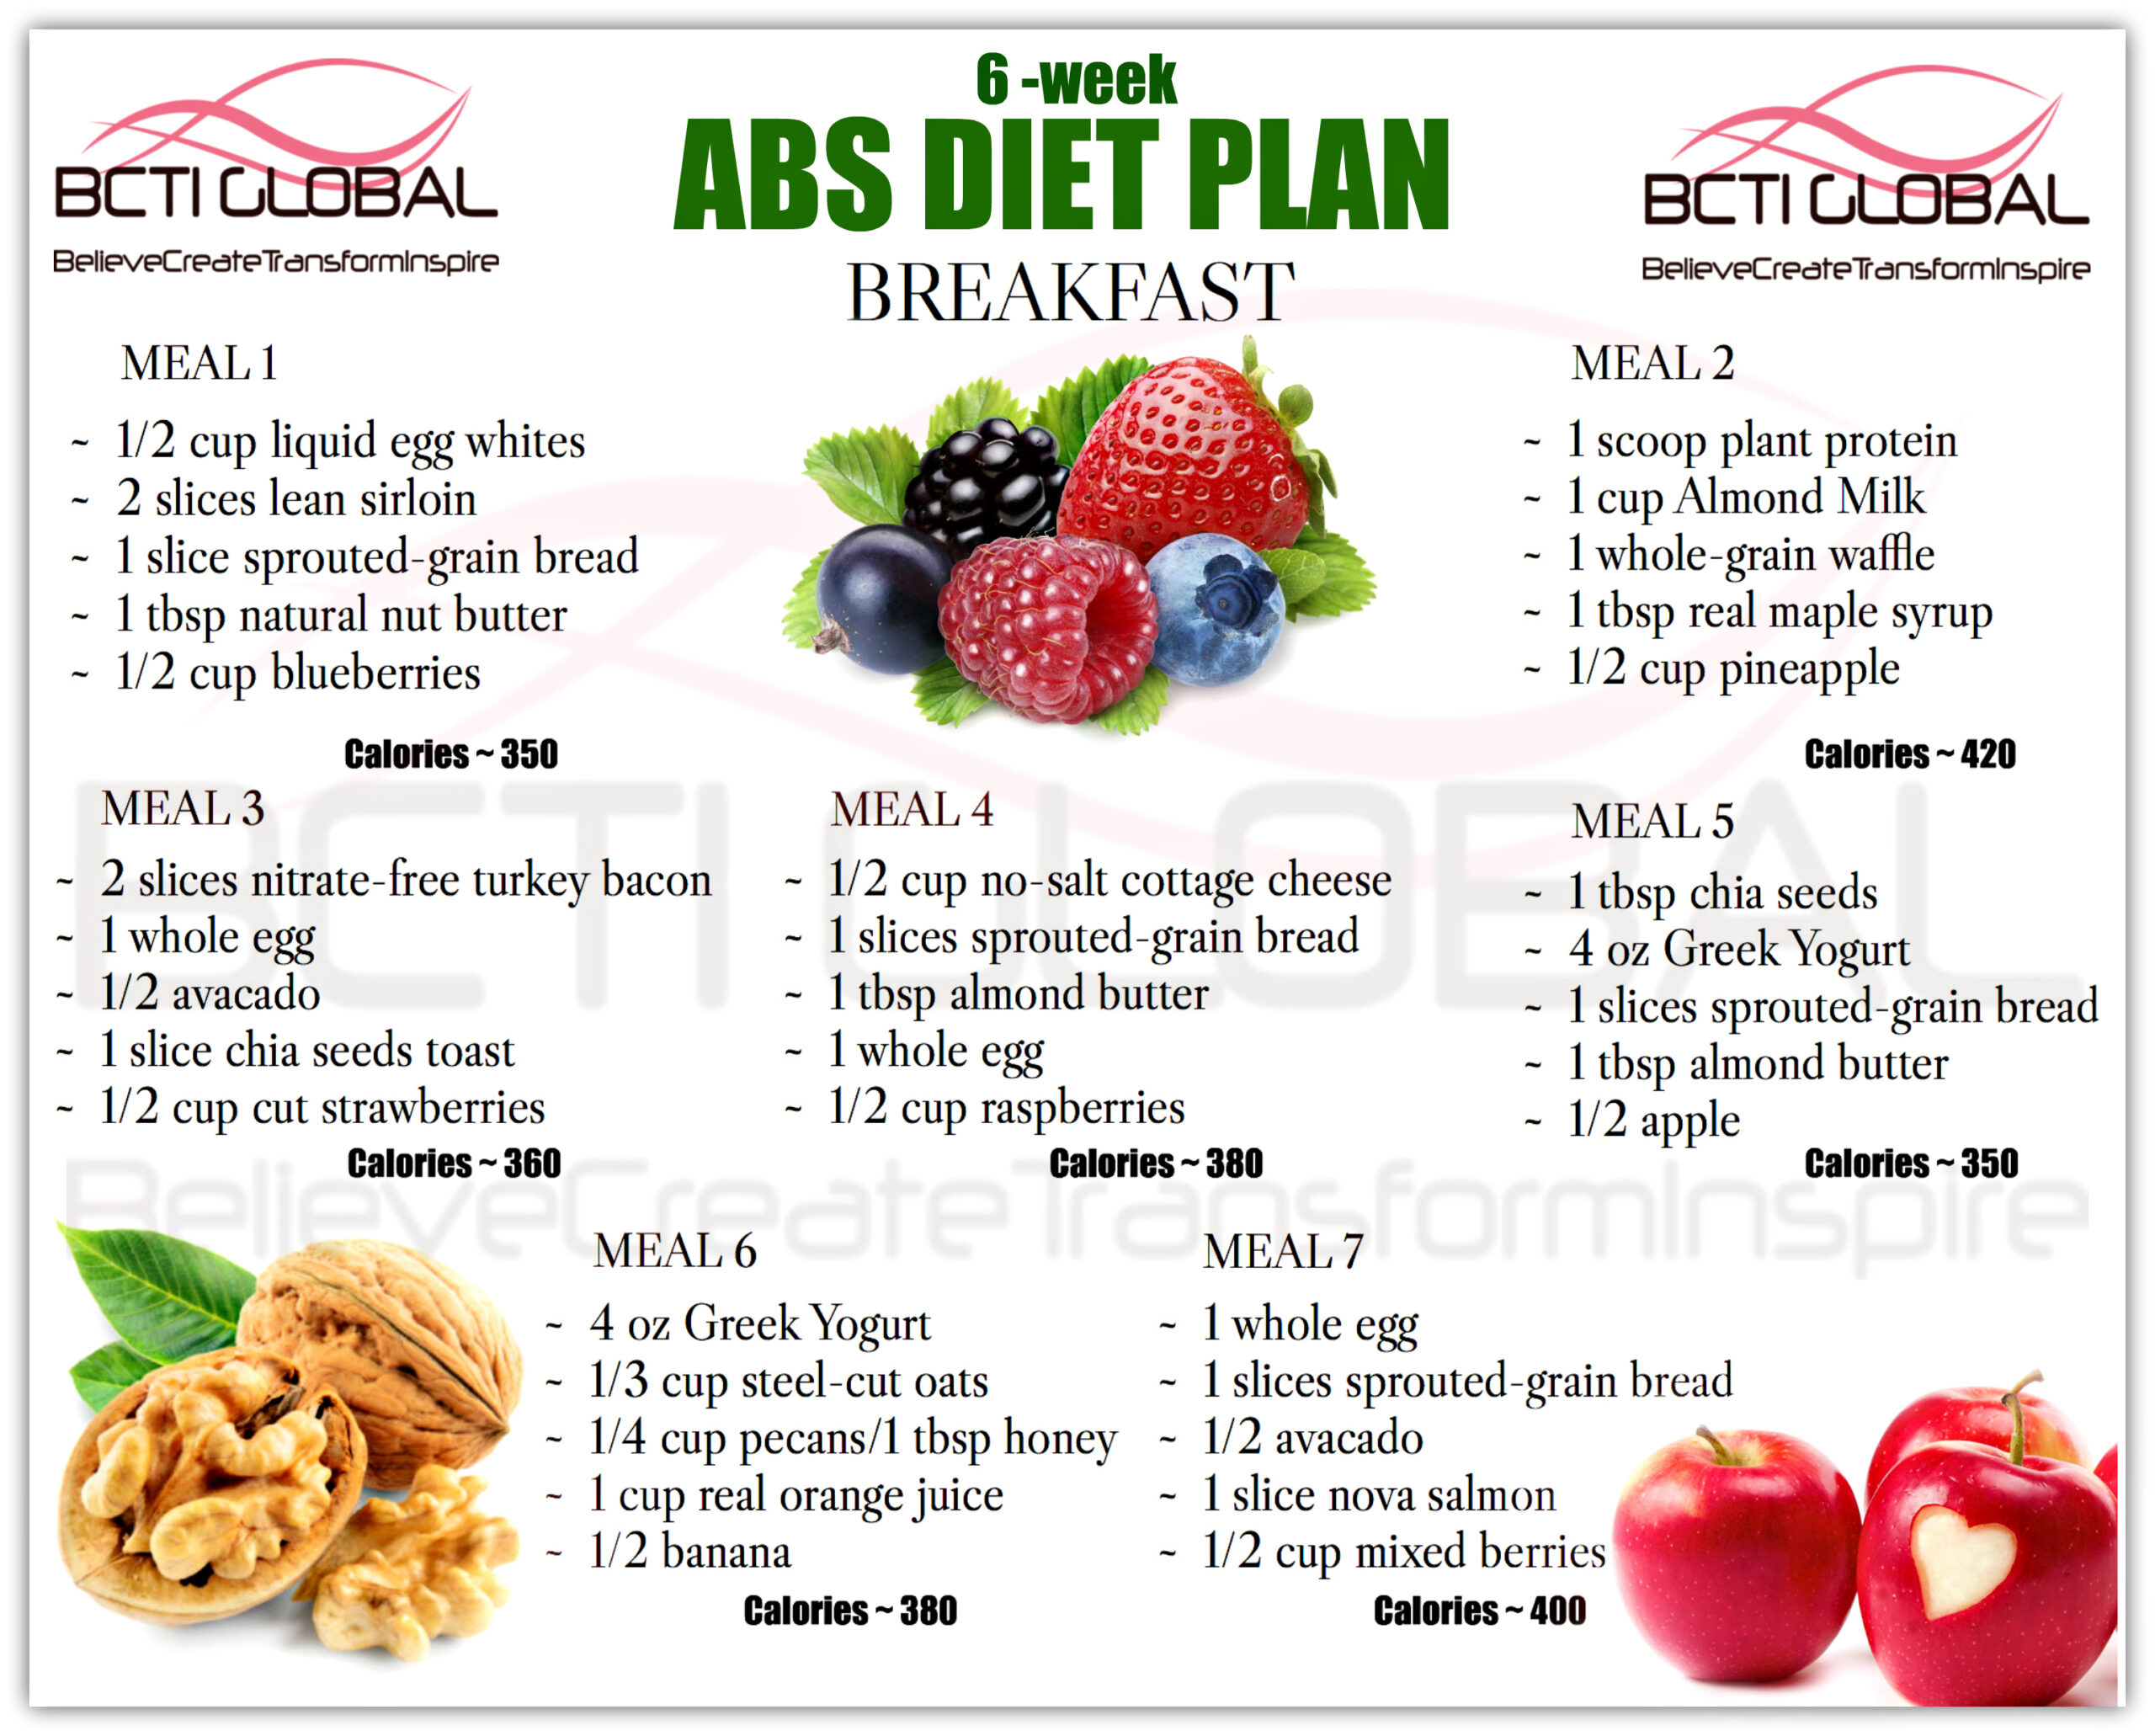 6 WEEK ABS DIET PLAN MIX AND MATCH LUNCH MEAL PLAN By 